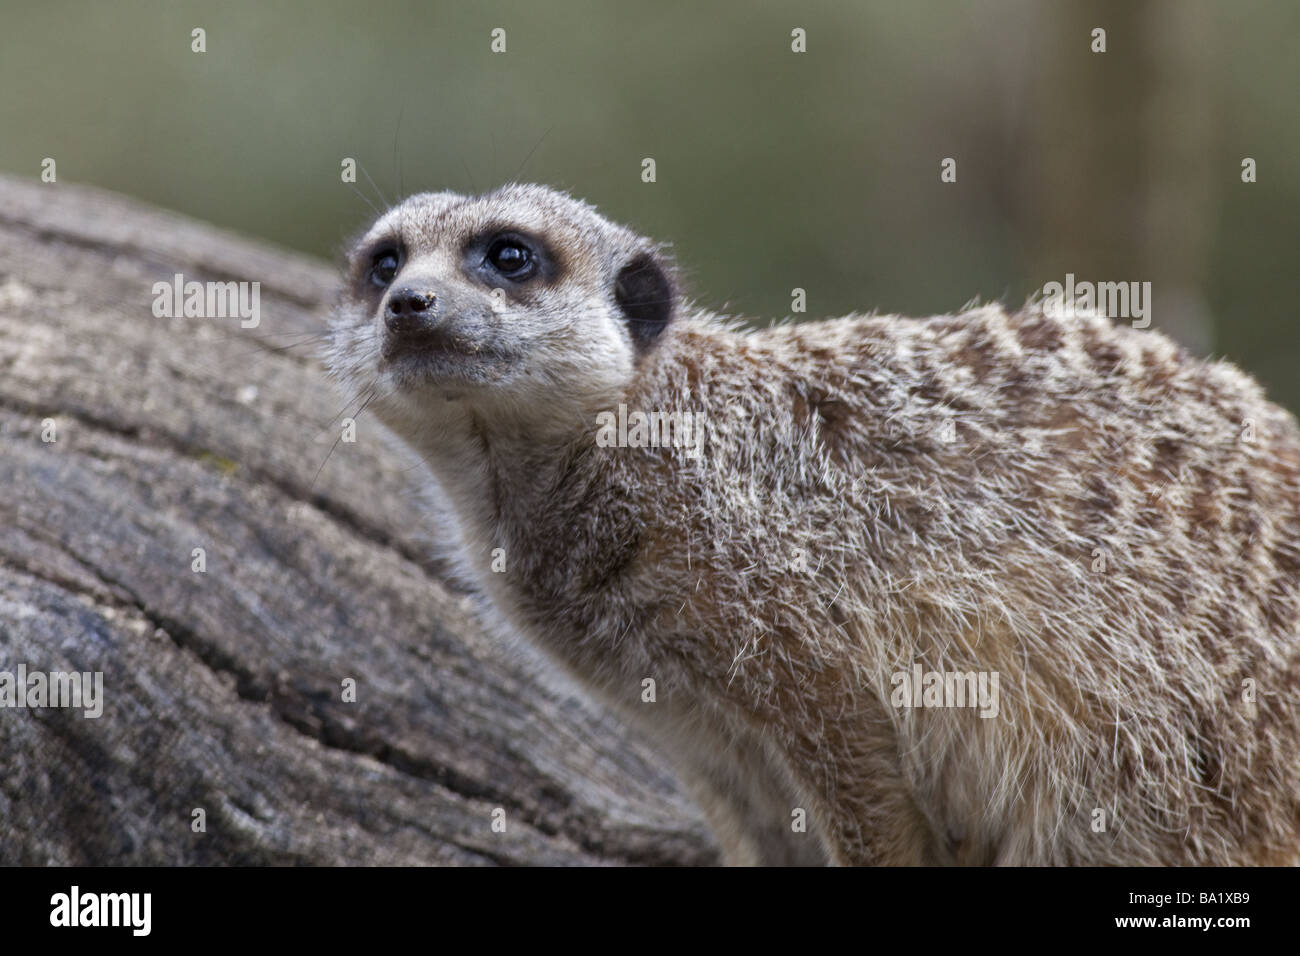 A Slender Tailed Meerkat standing against a tree trunk Stock Photo